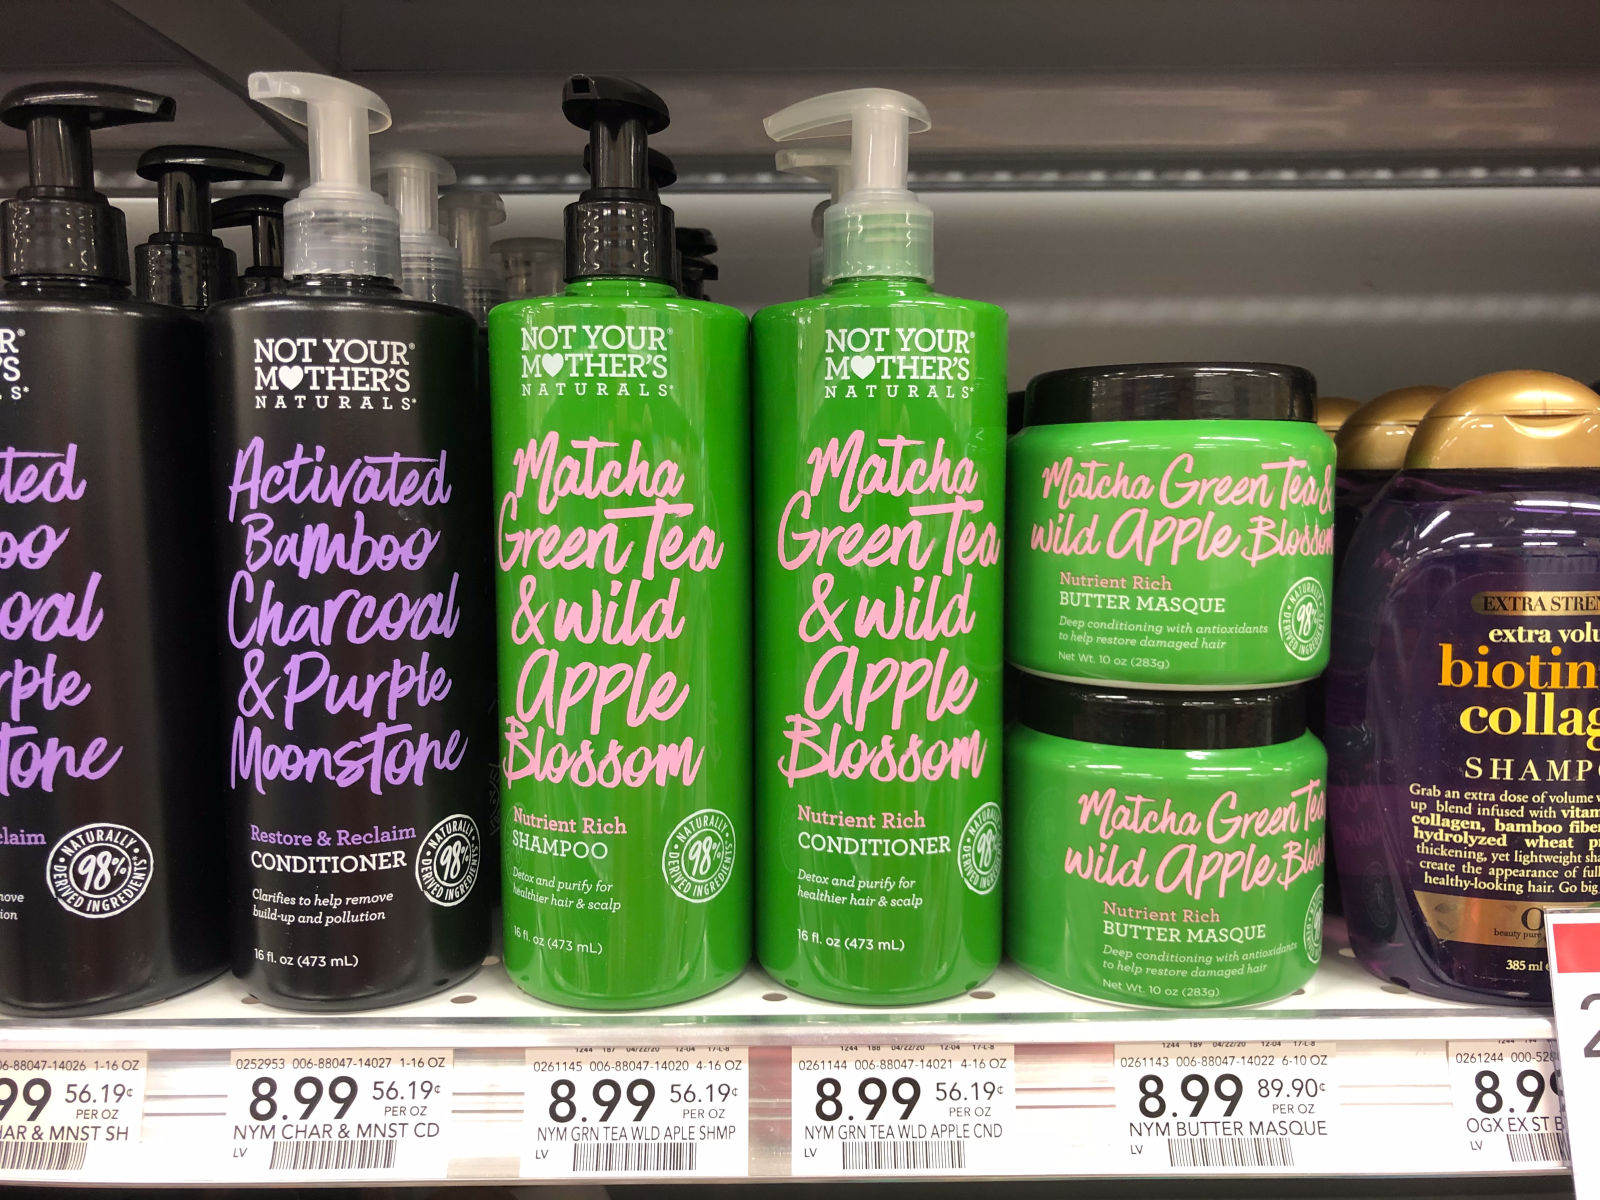 Get Salon Quality Products At Affordable Prices With Not Your Mother's Haircare - Available At Your Local Publix on I Heart Publix